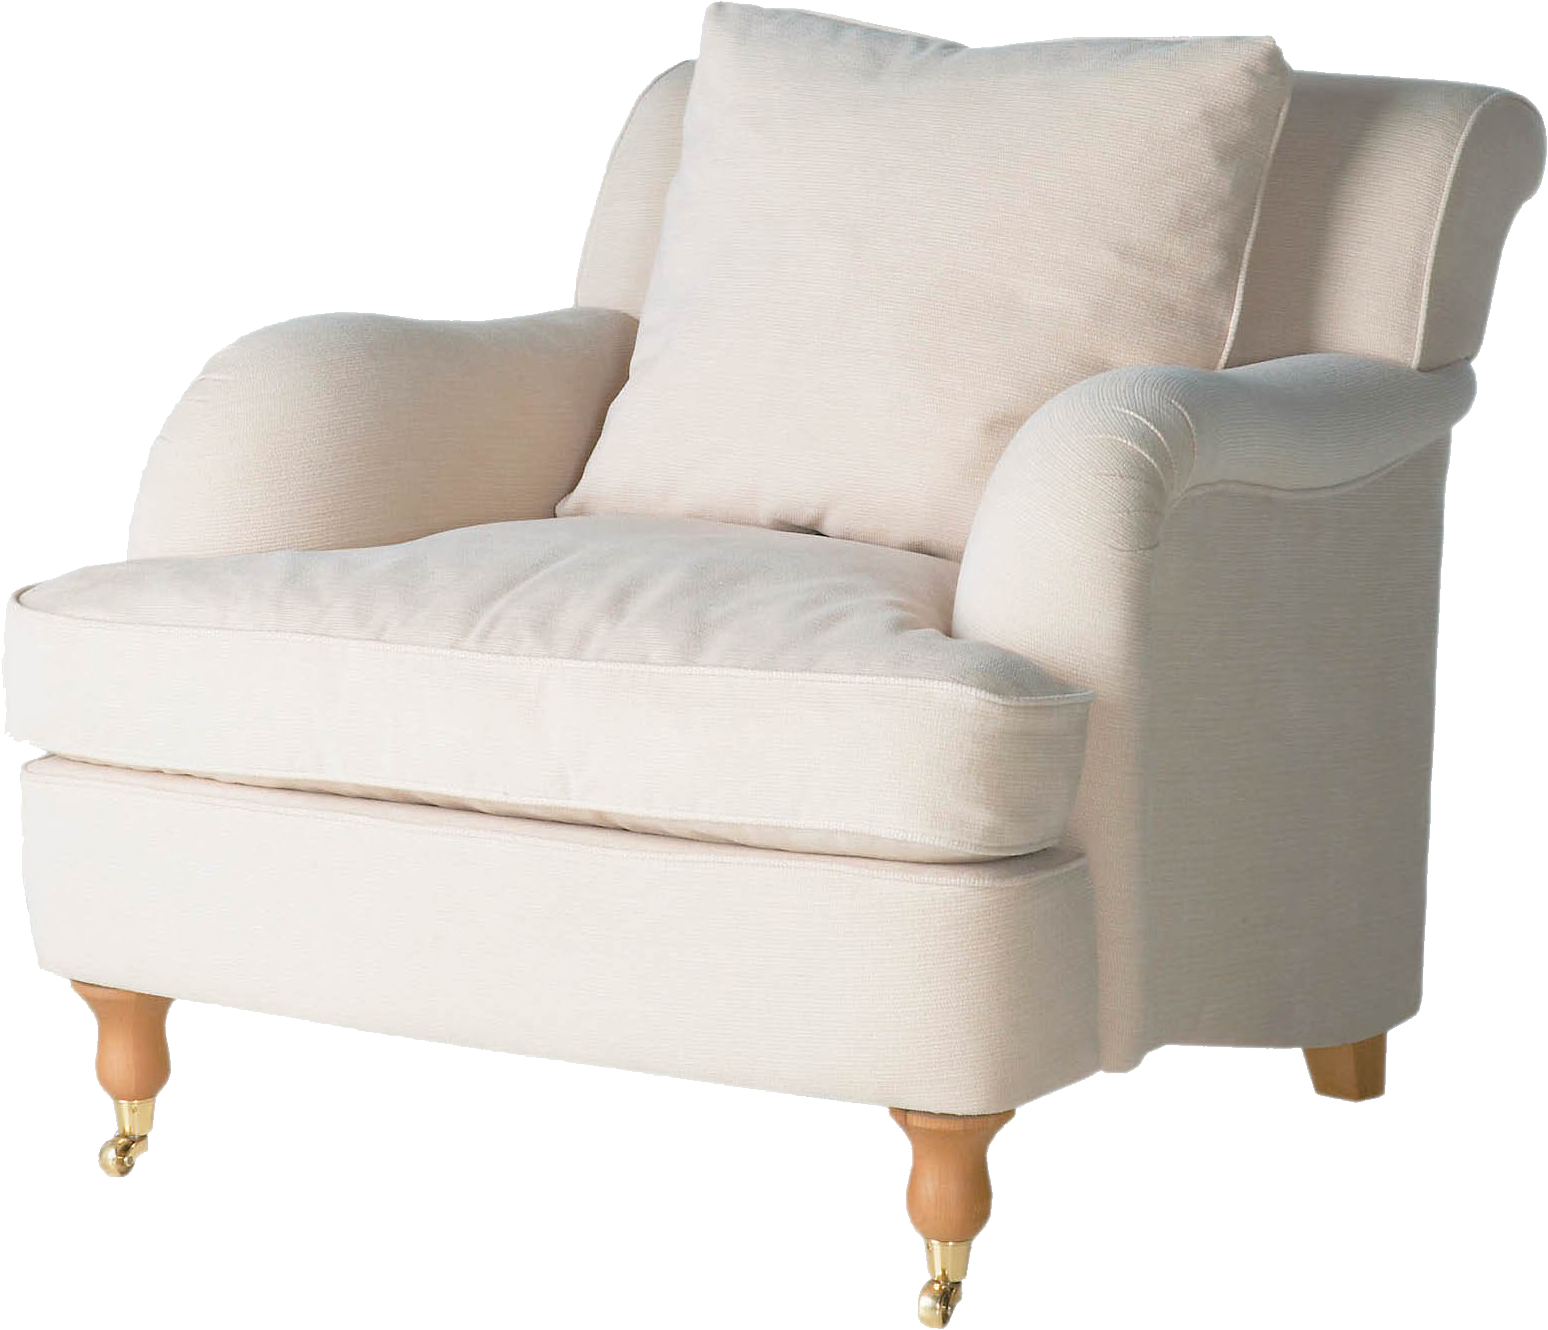 Armchair Png Image - Armchair, Transparent background PNG HD thumbnail